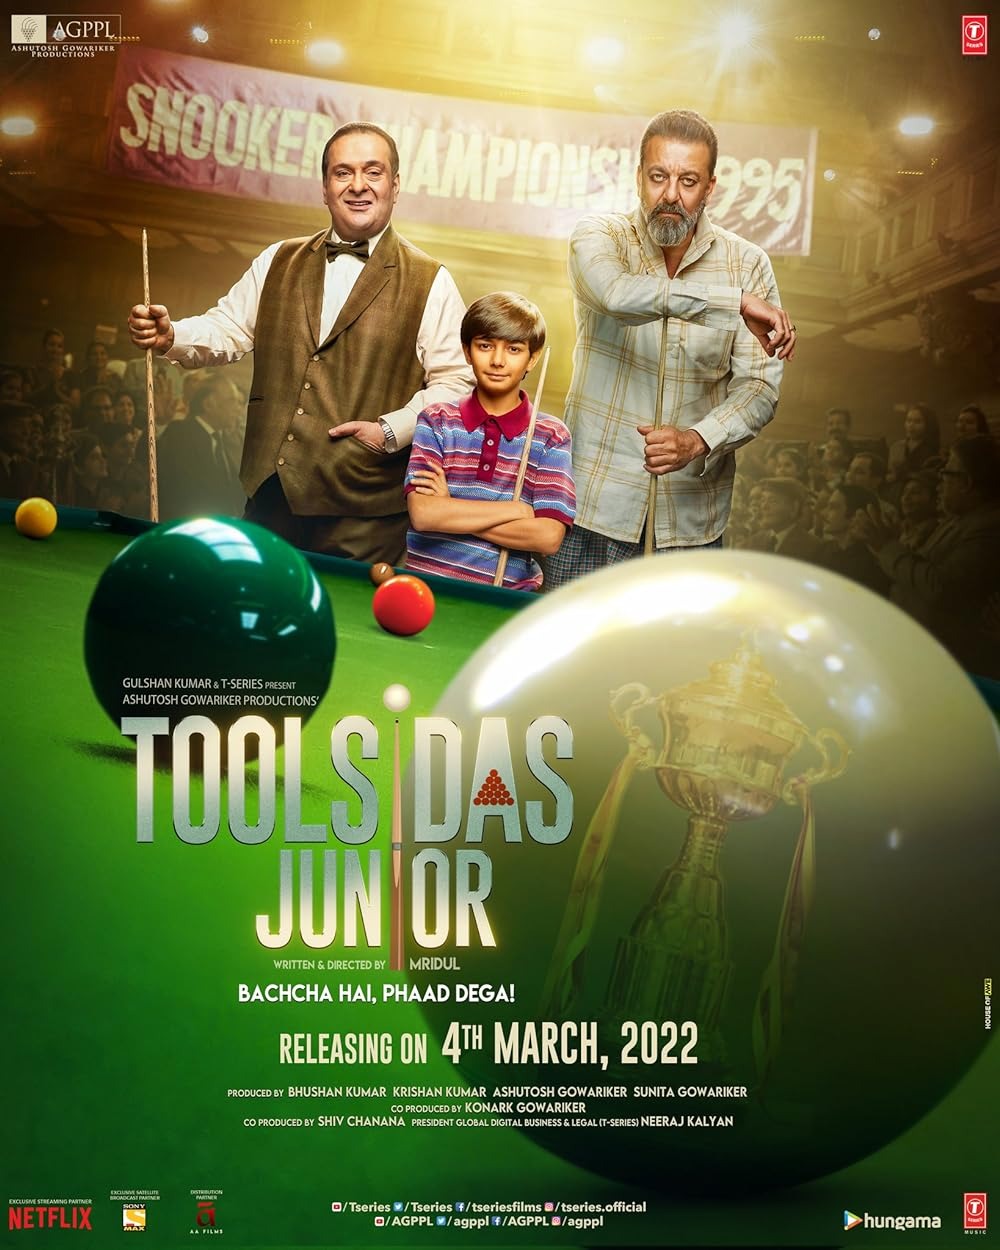 Extra Large Movie Poster Image for Toolsidas Junior (#3 of 3)